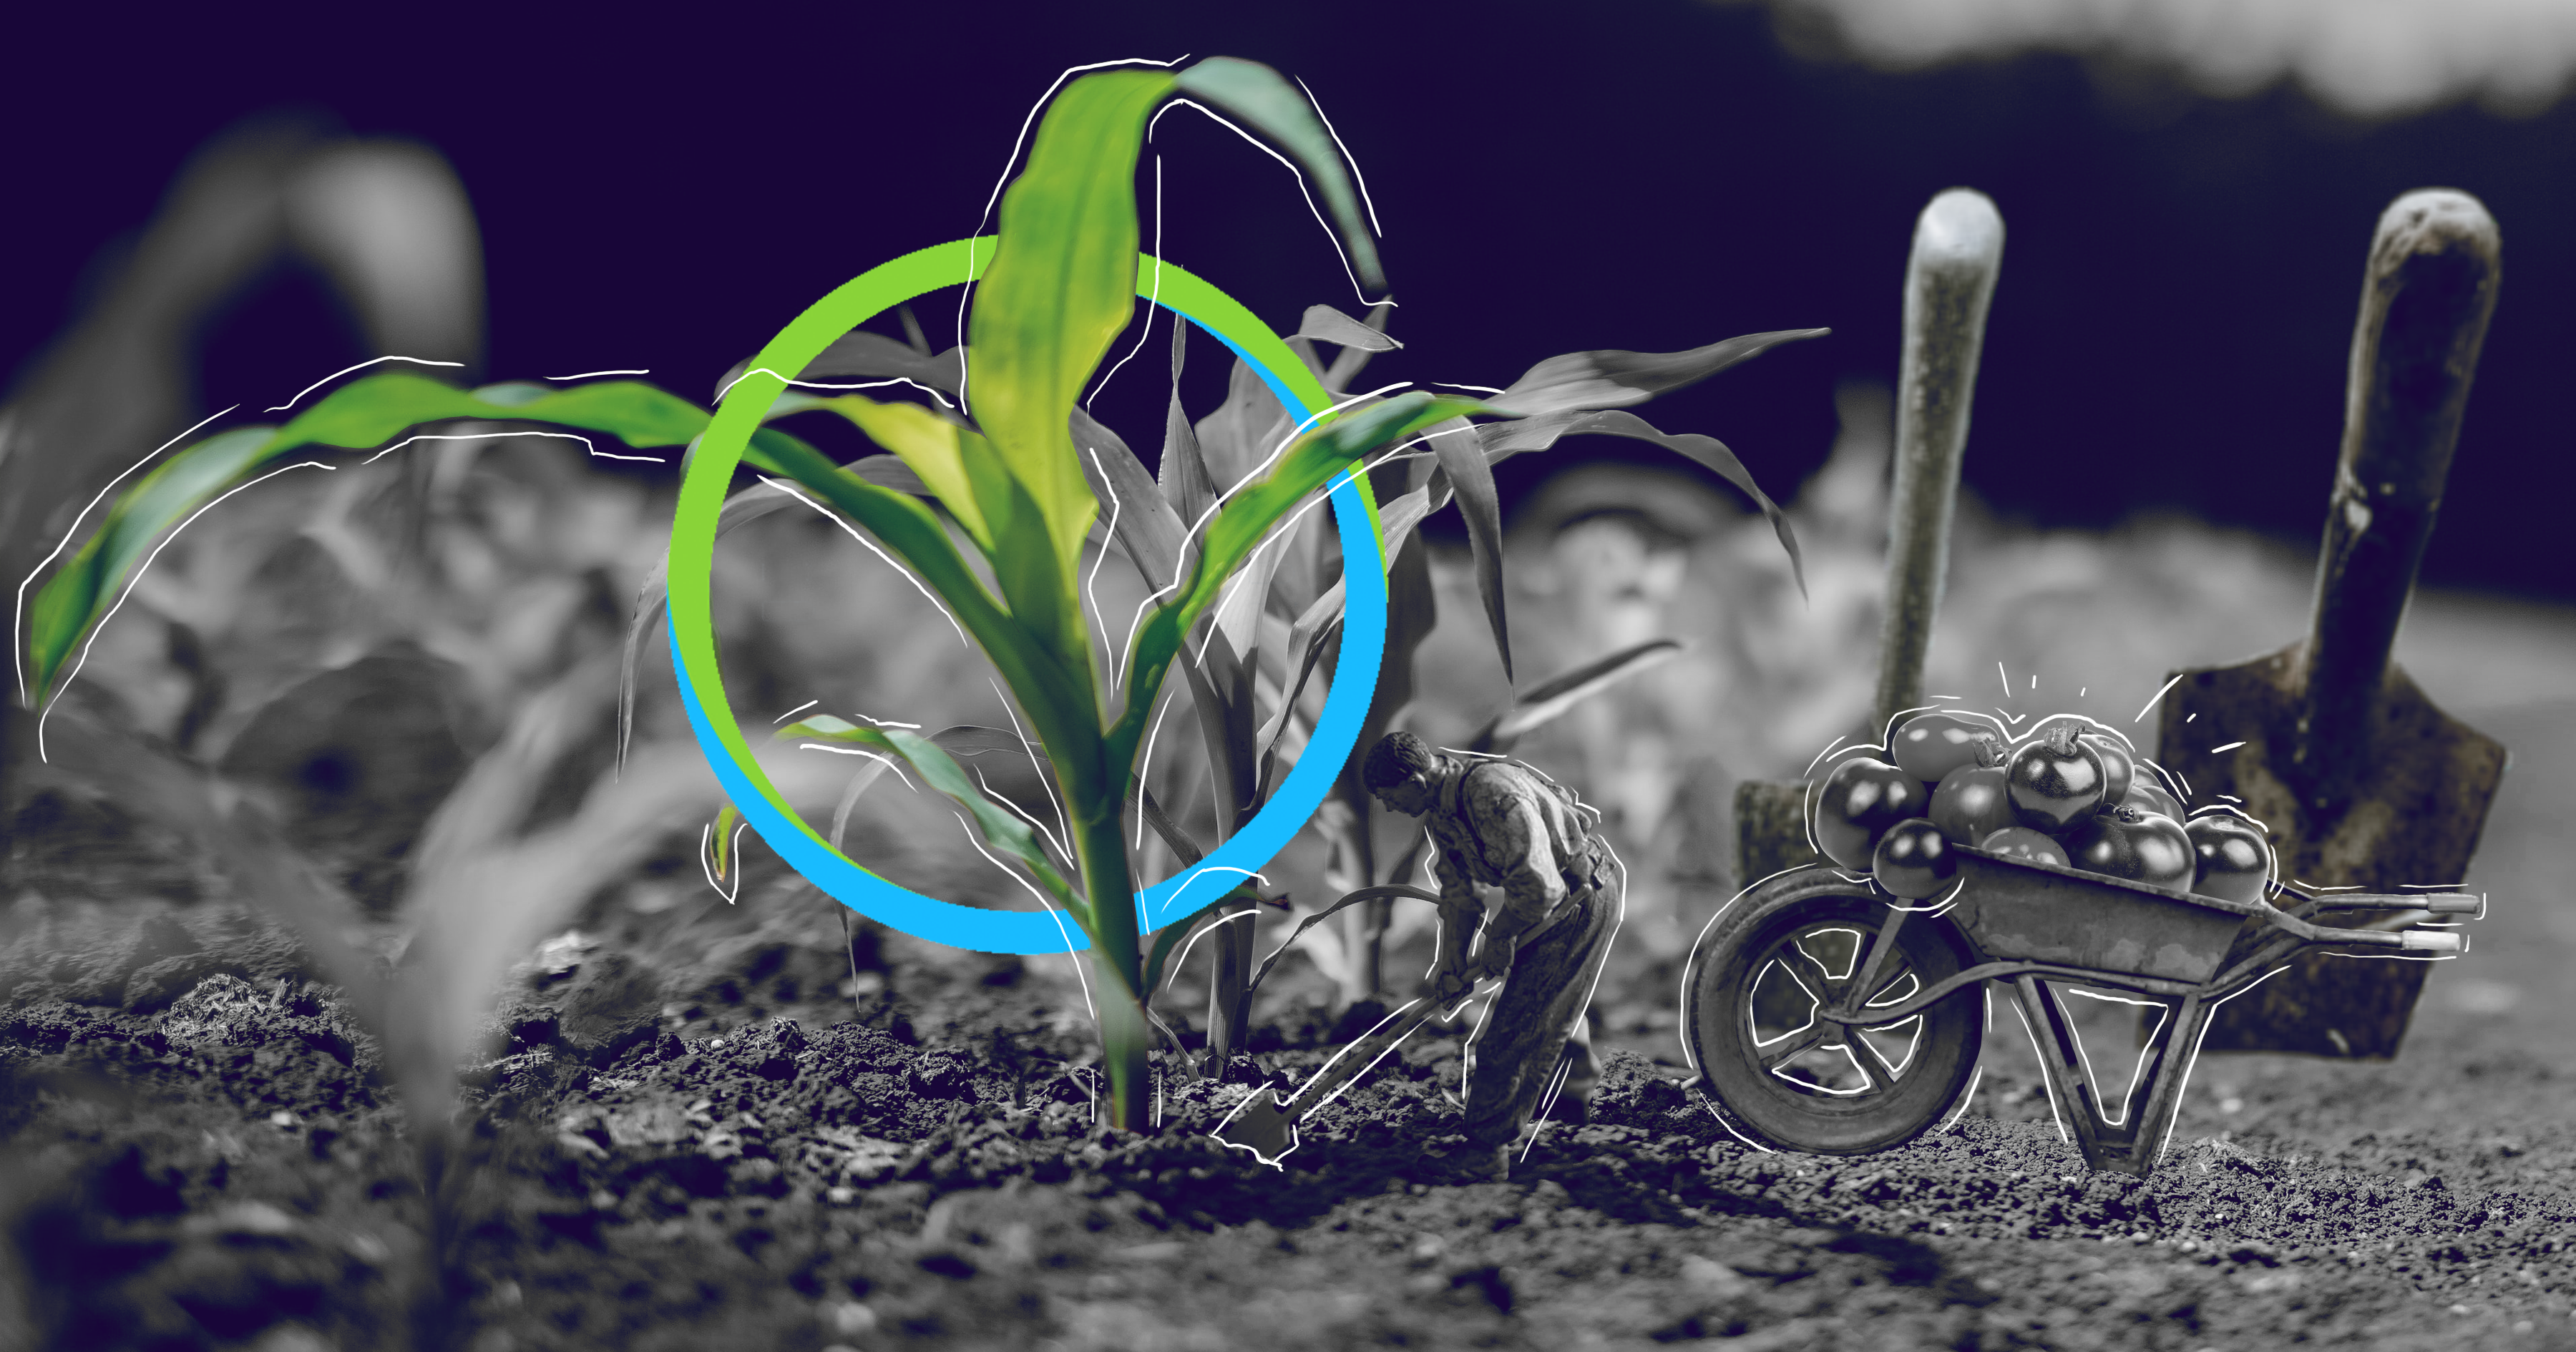 Bayer Crop Science is a leading innovator in crop science and pest control. They sought out Halo to streamline their research administration.